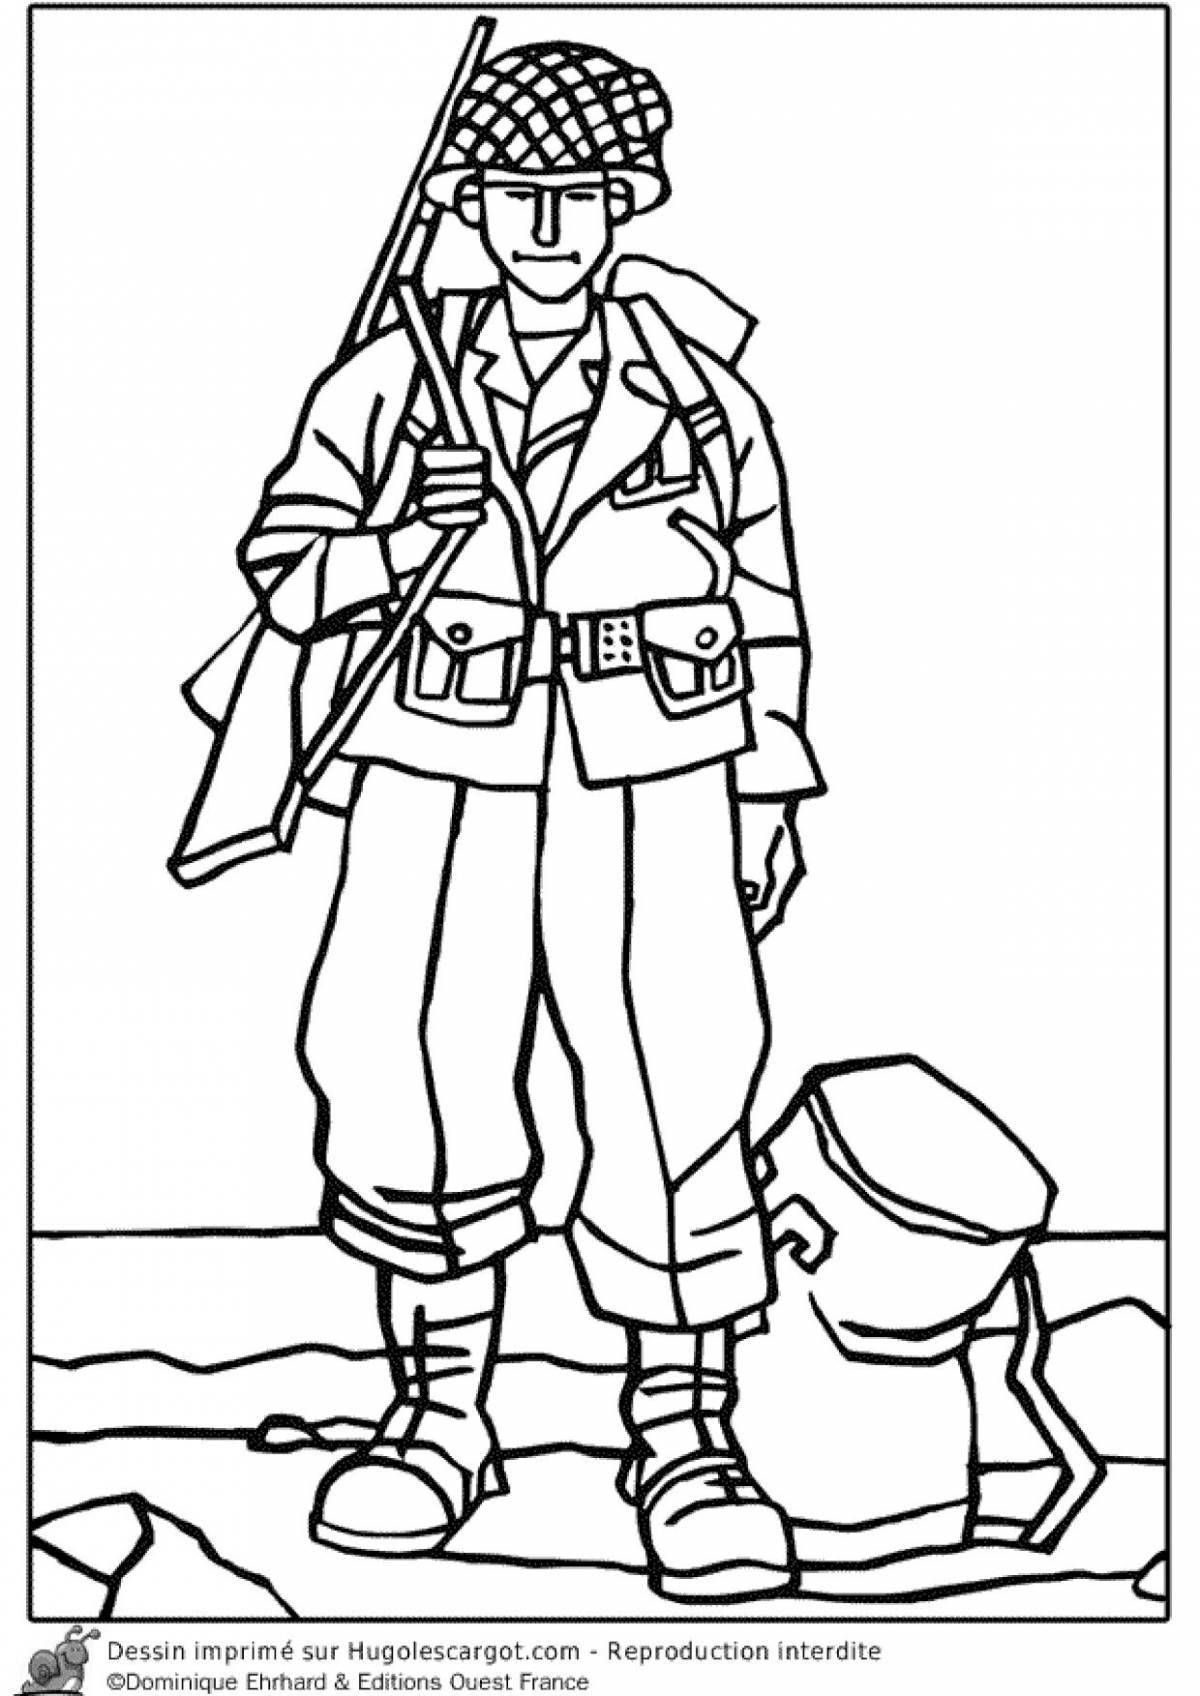 Amazing toy soldier coloring pages for boys